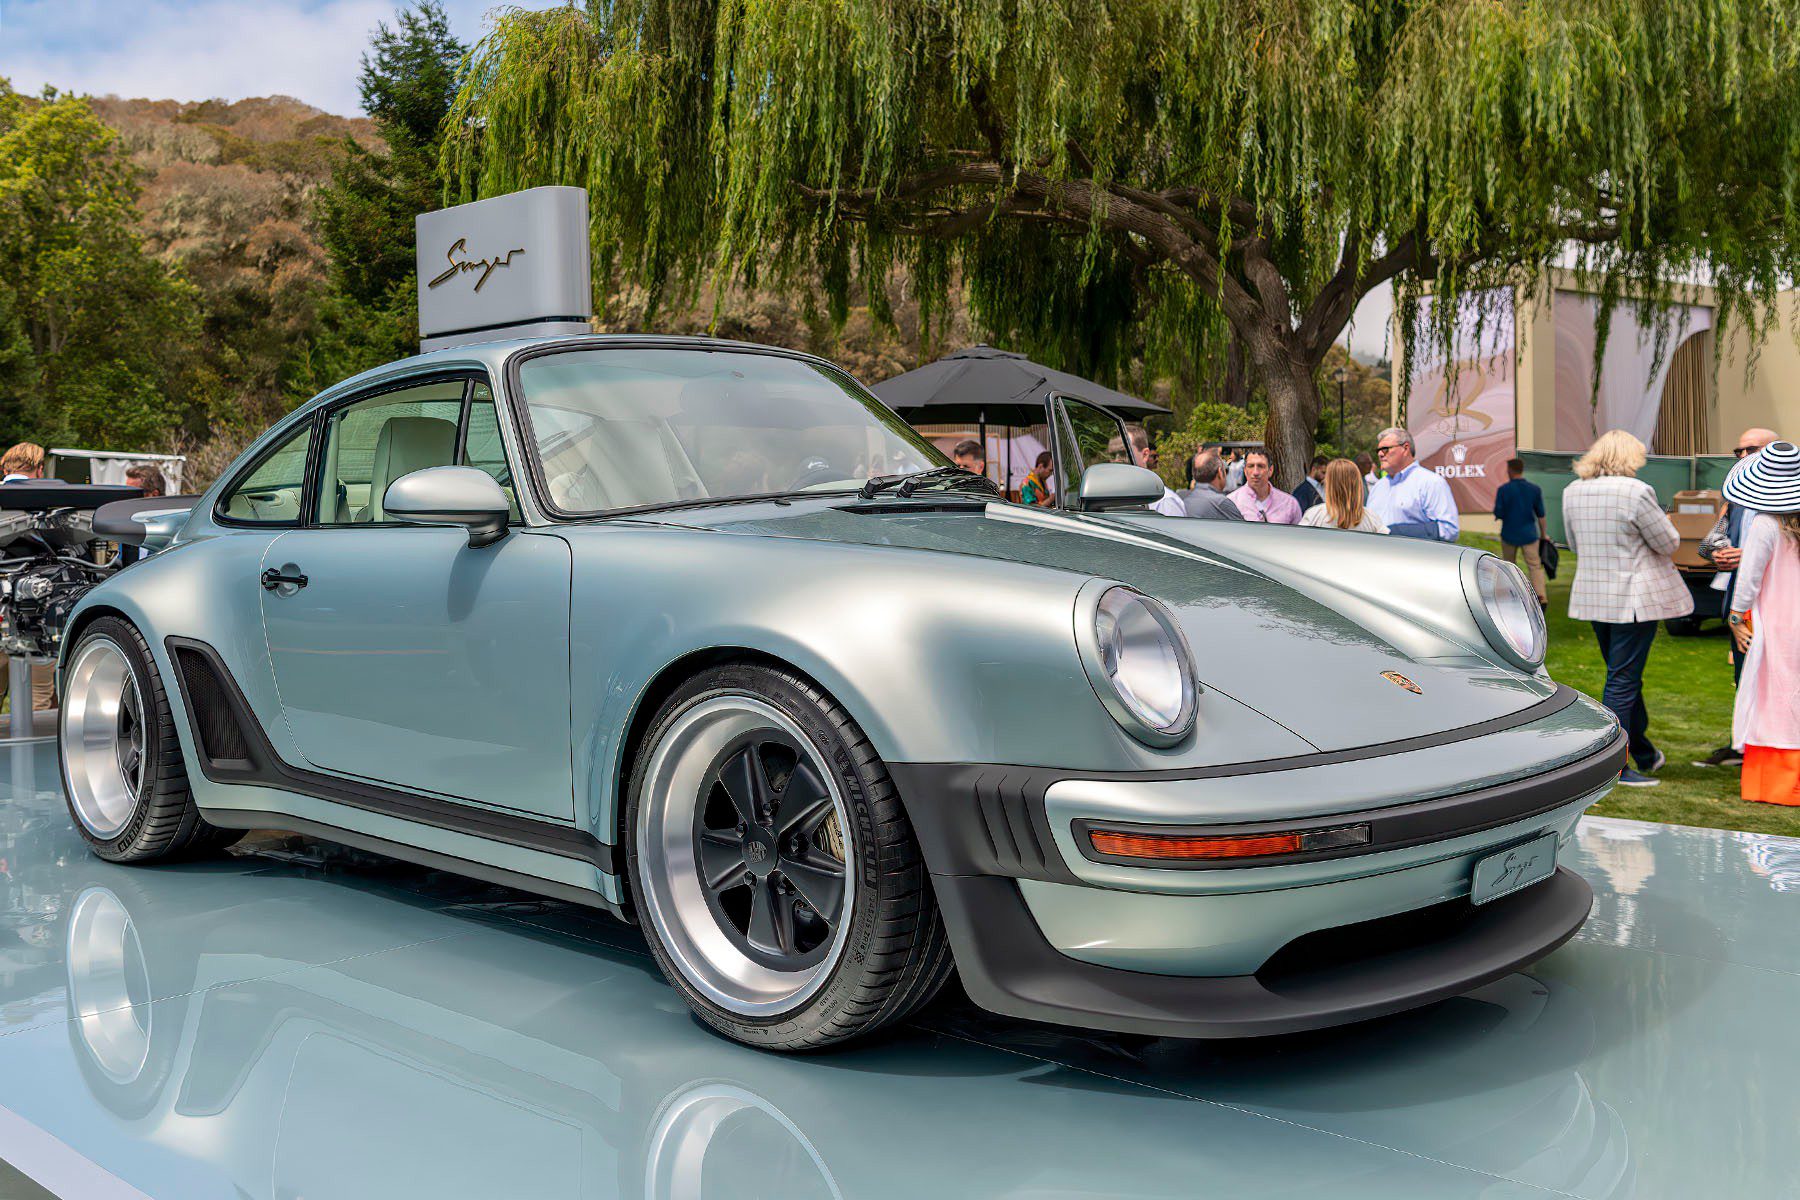 Singer Vehicle Design once again shocked the boutique air-cooled Porsche market with its latest “Turbo Study,” inspired by the original 1975 Porsche 930. © 2022 Rex McAfee RexMcAfee@gmail.com